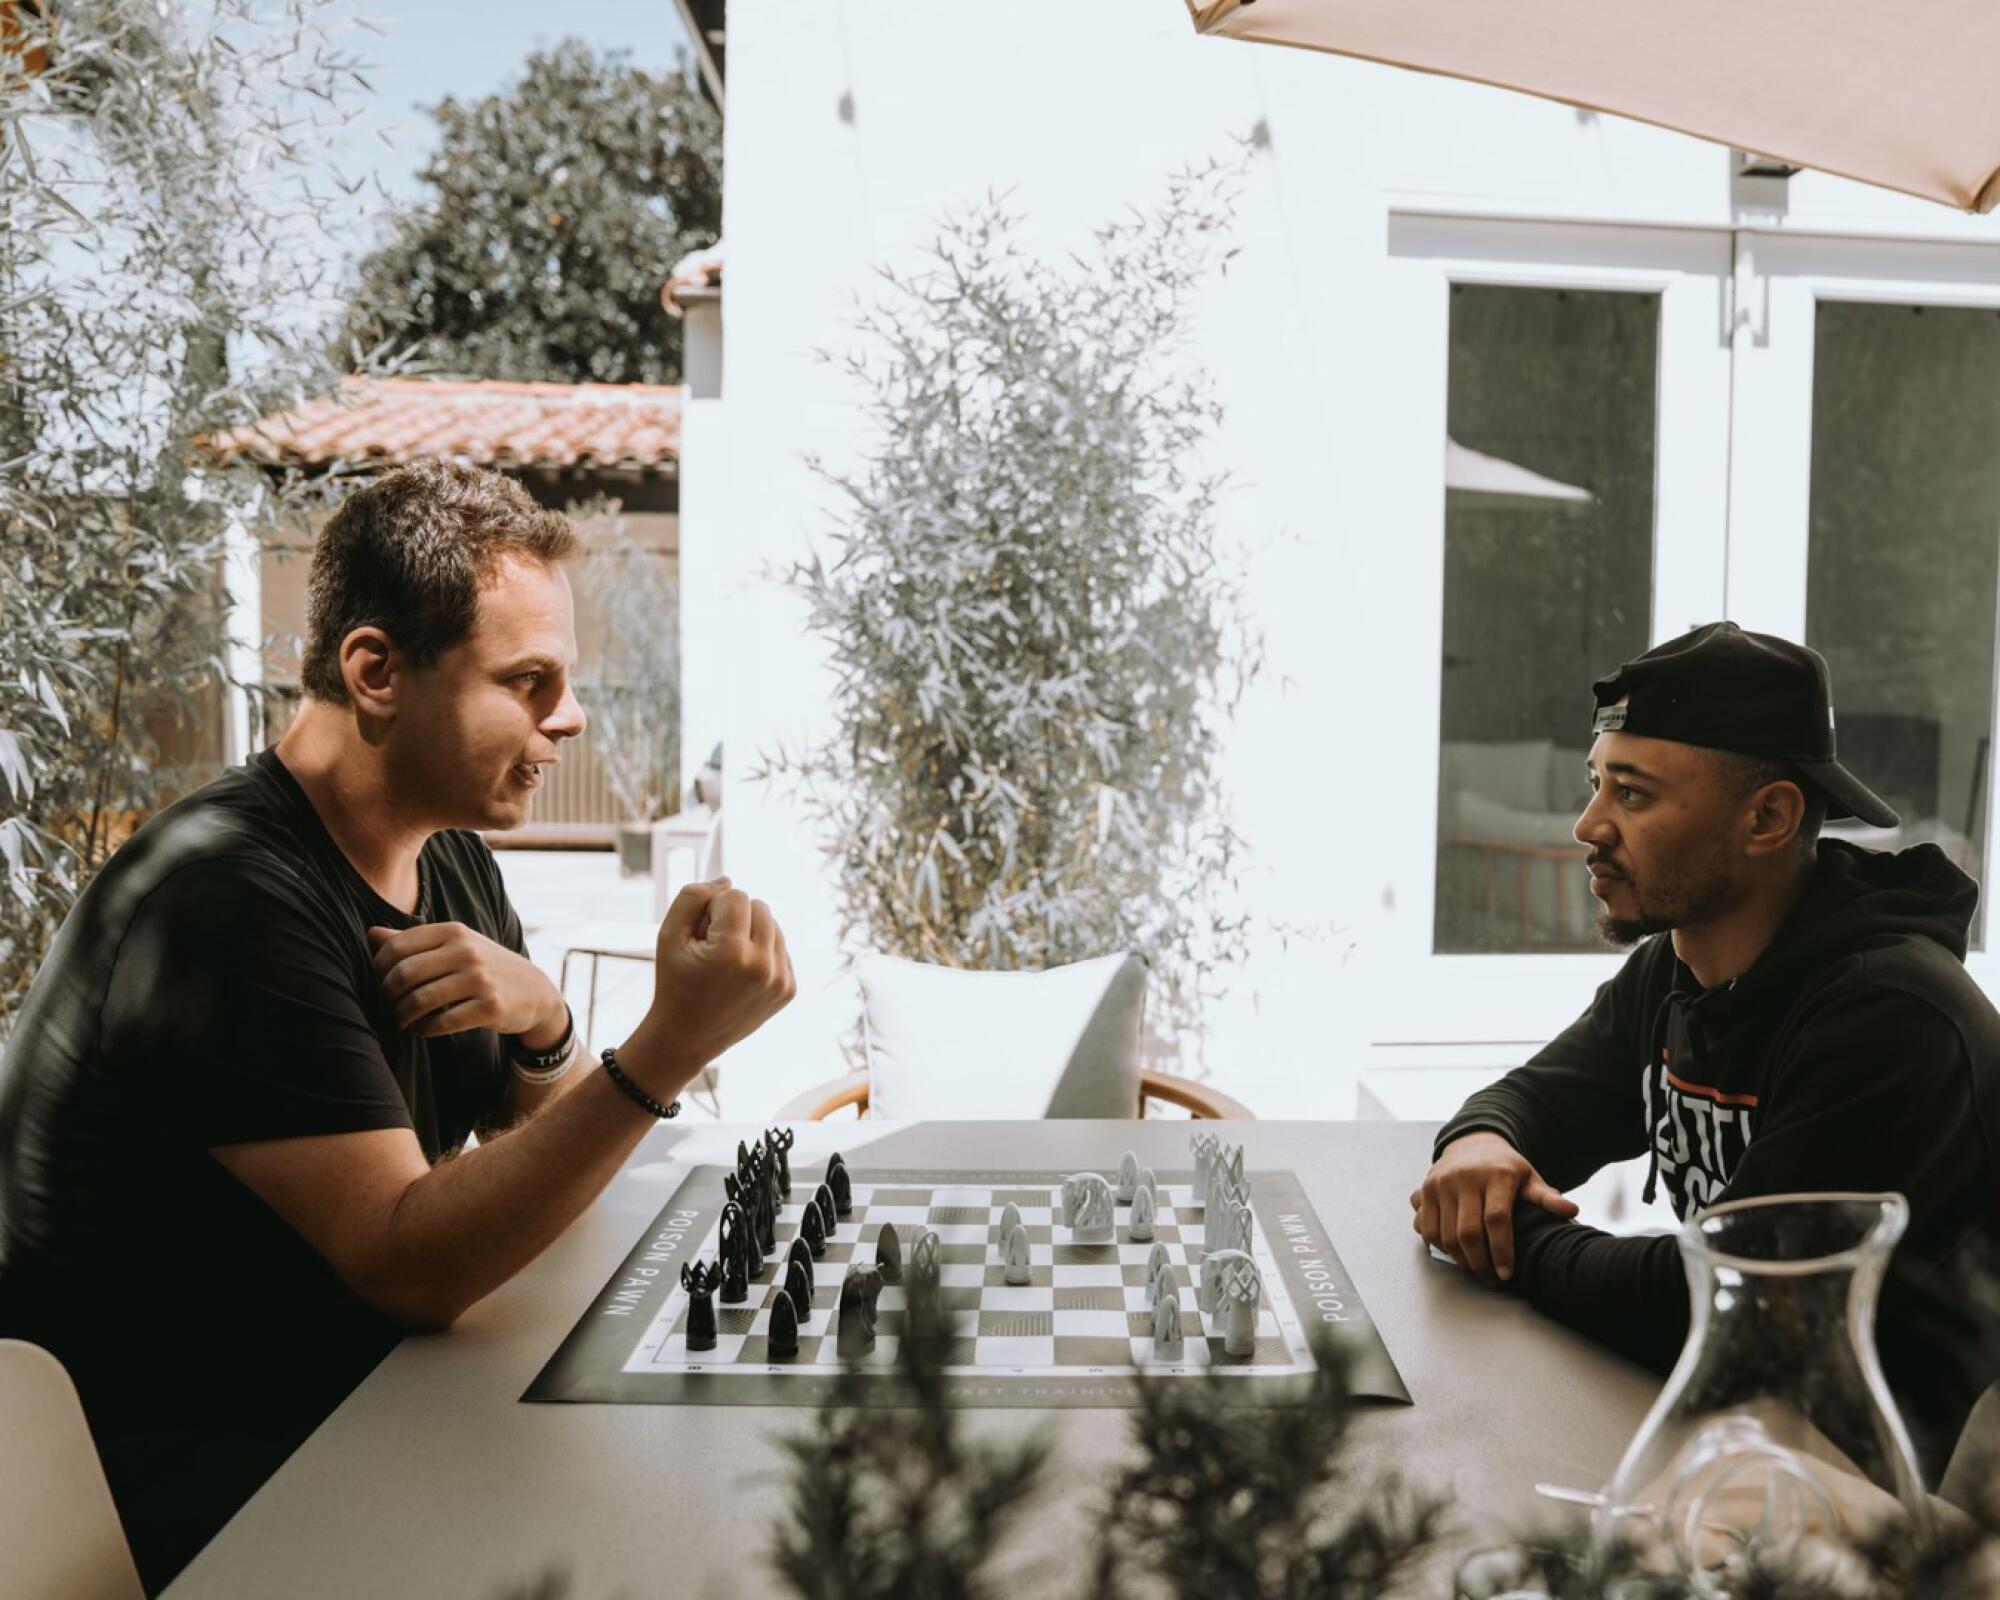 The Dodgers' Mookie Betts, right, plays chess with Seth Makowsky.